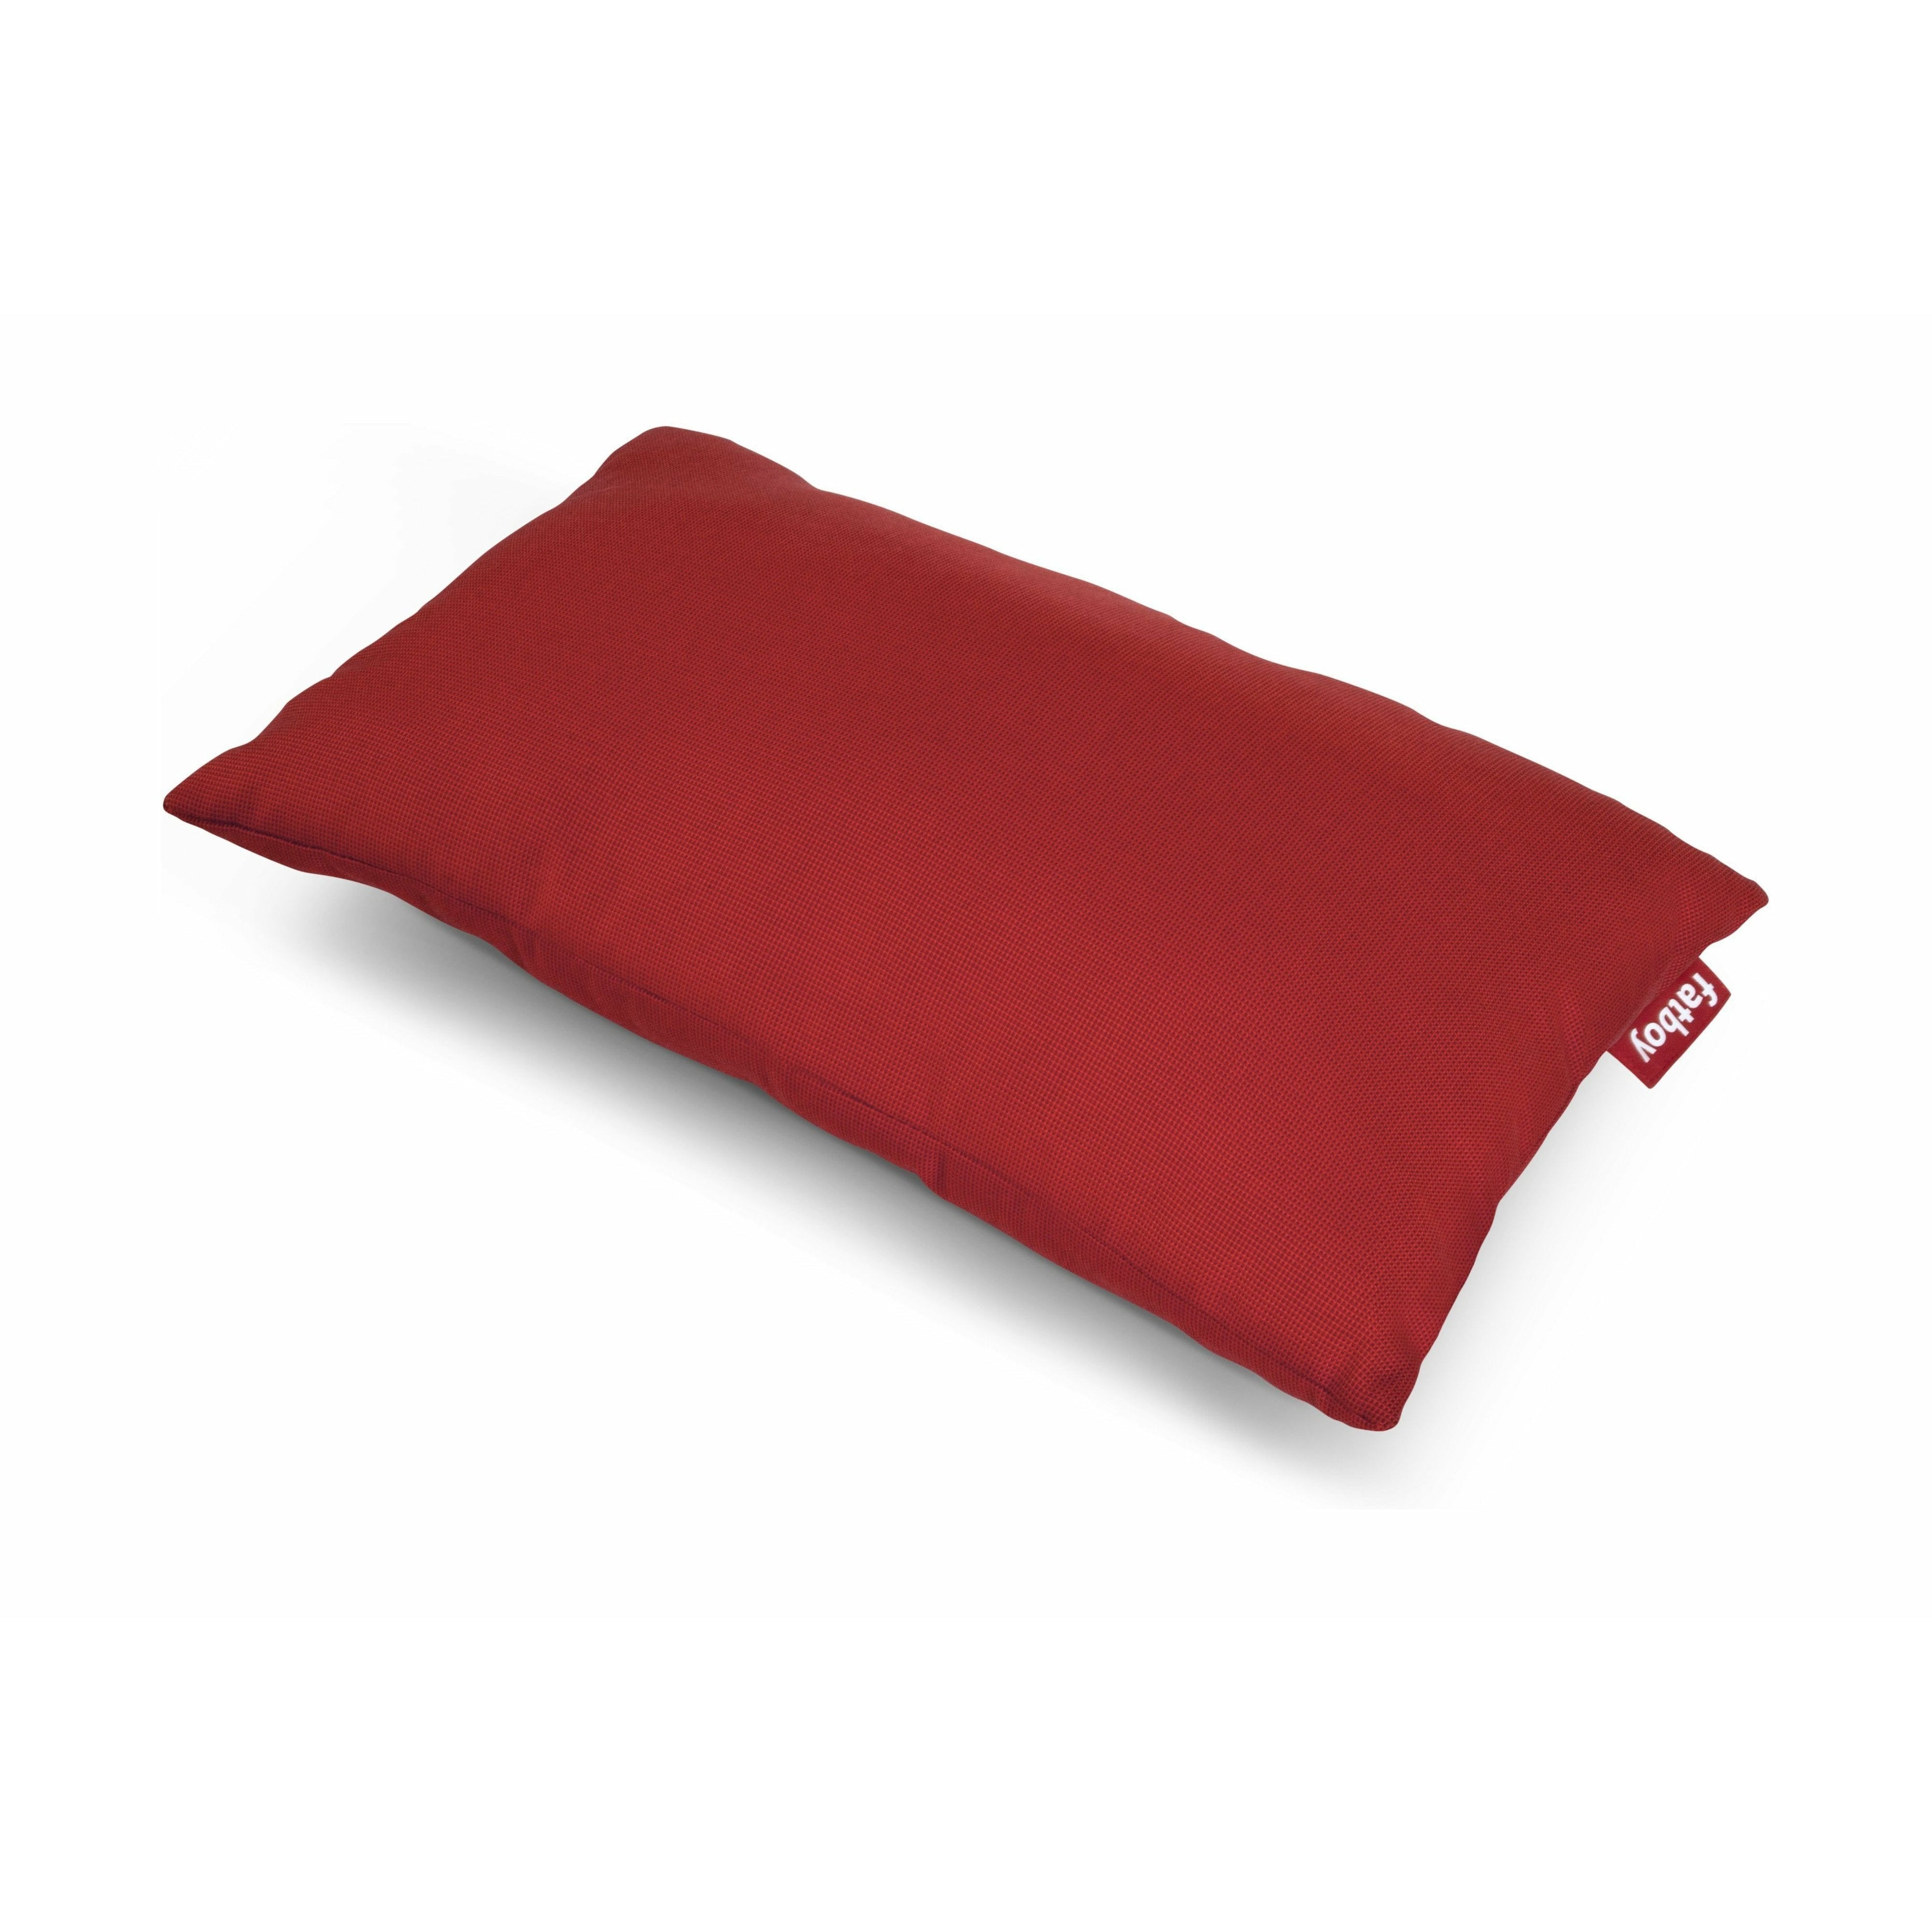 Fatboy Pillow King King Outdoor, rot